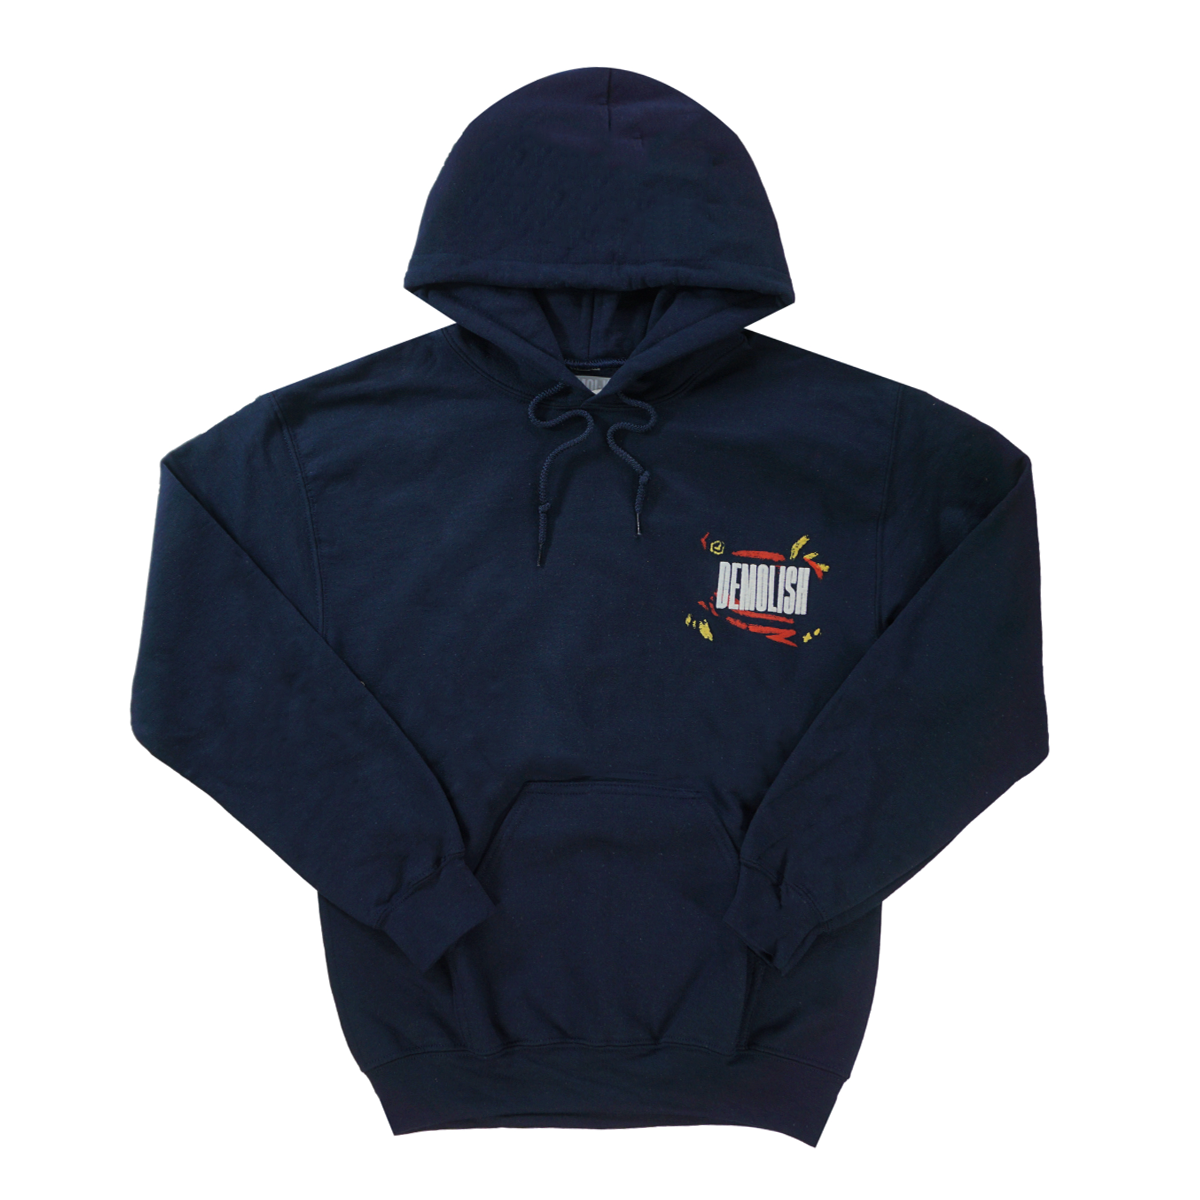 Hang Over On Life Hoodie (Navy/Red/Gold) /C8